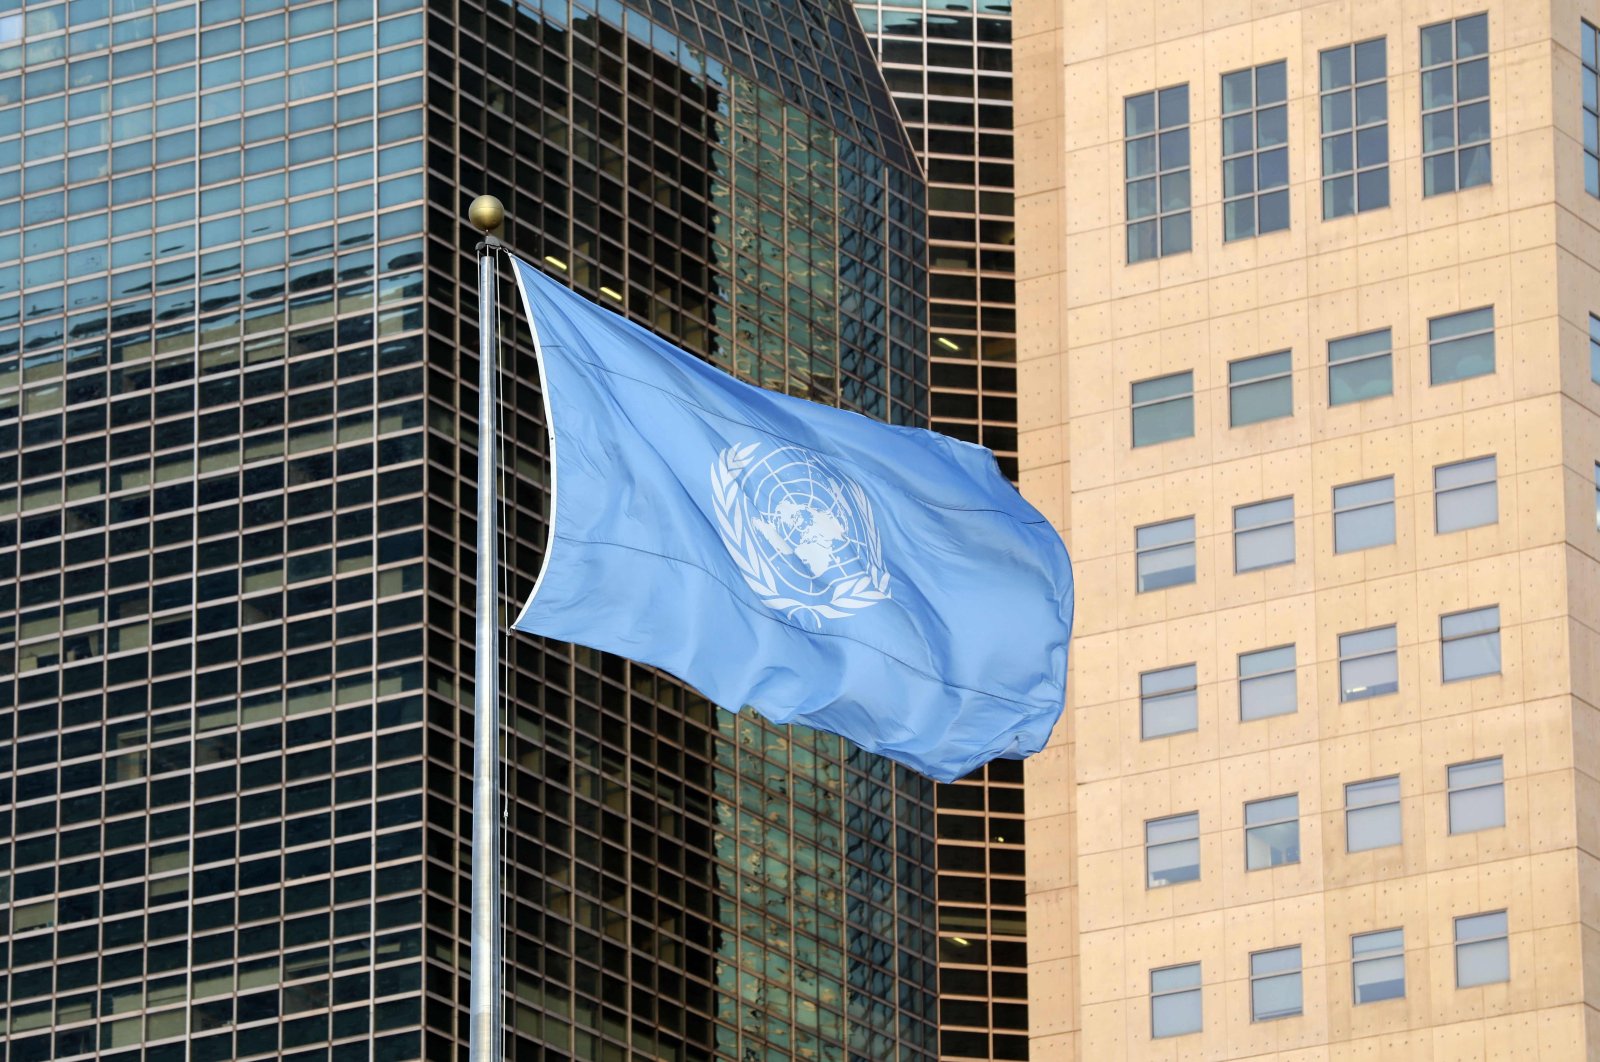 The United Nations flag waves near U.N. headquarters in New York, Sept. 23, 2019. (AFP Photo)